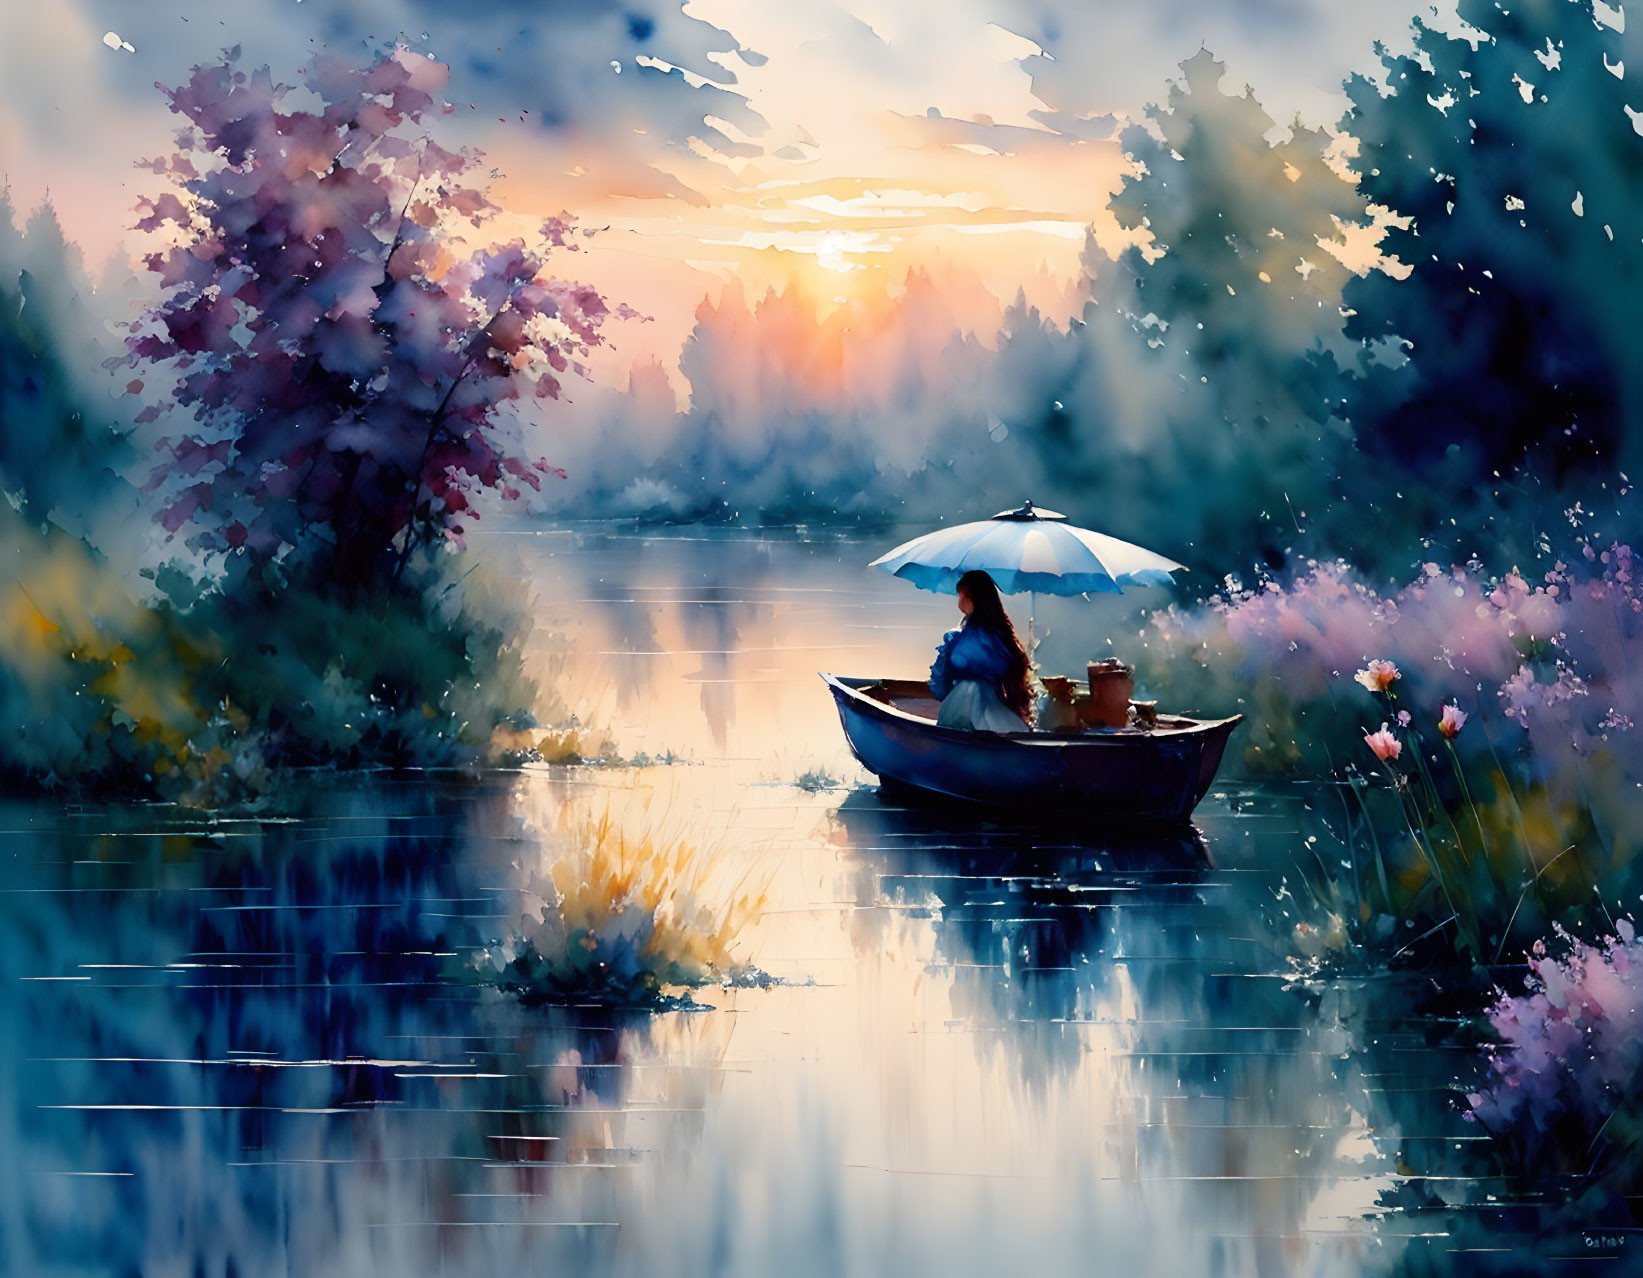 Person with Umbrella in Boat Surrounded by Blossoming Flora on Serene Waterbody at D